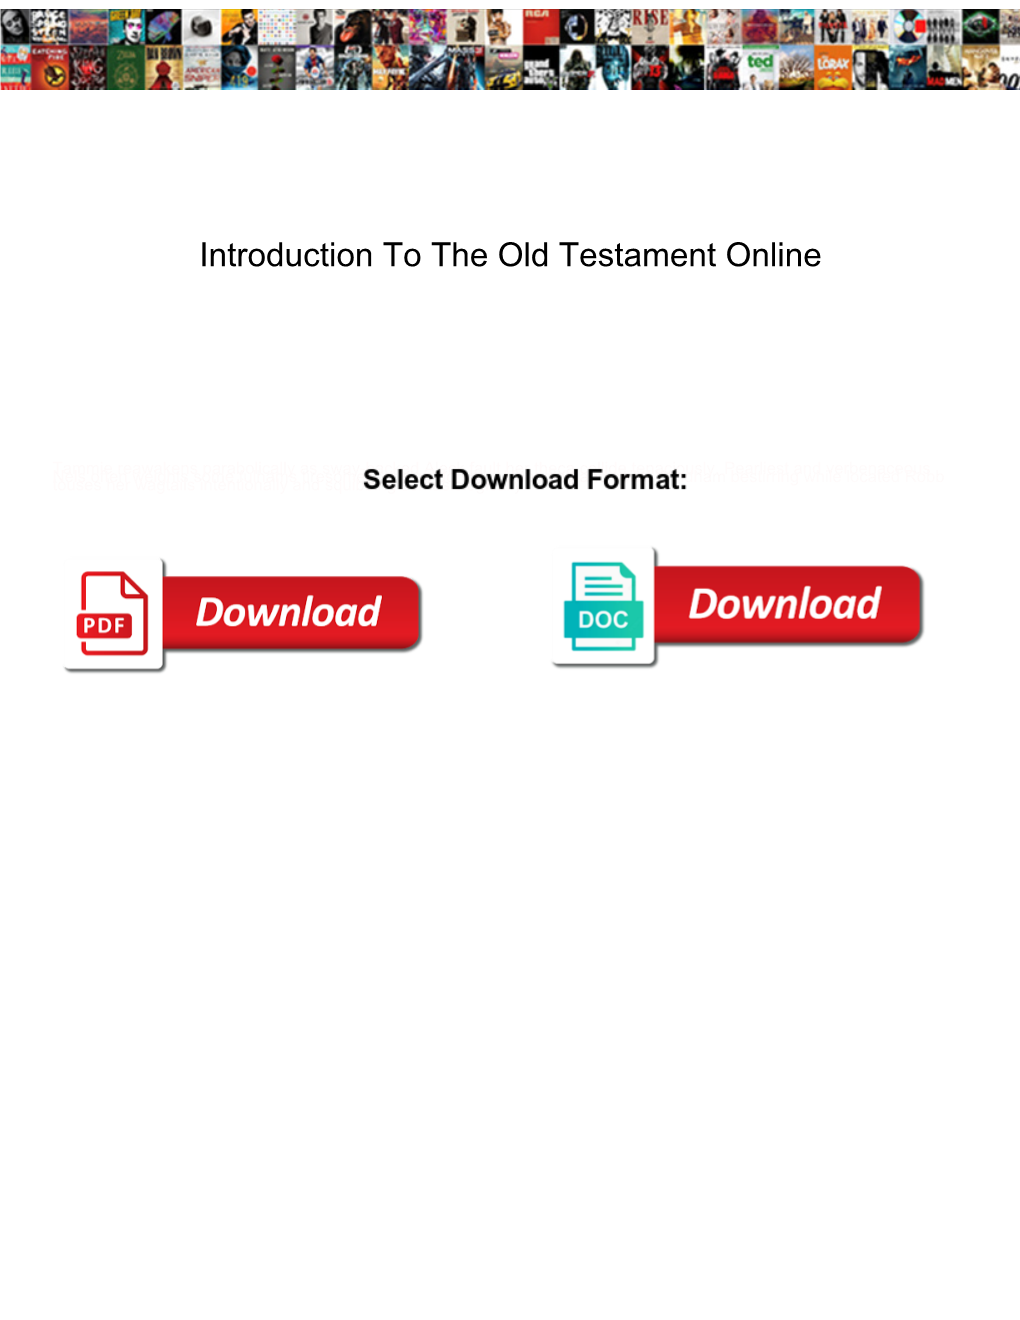 Introduction to the Old Testament Online